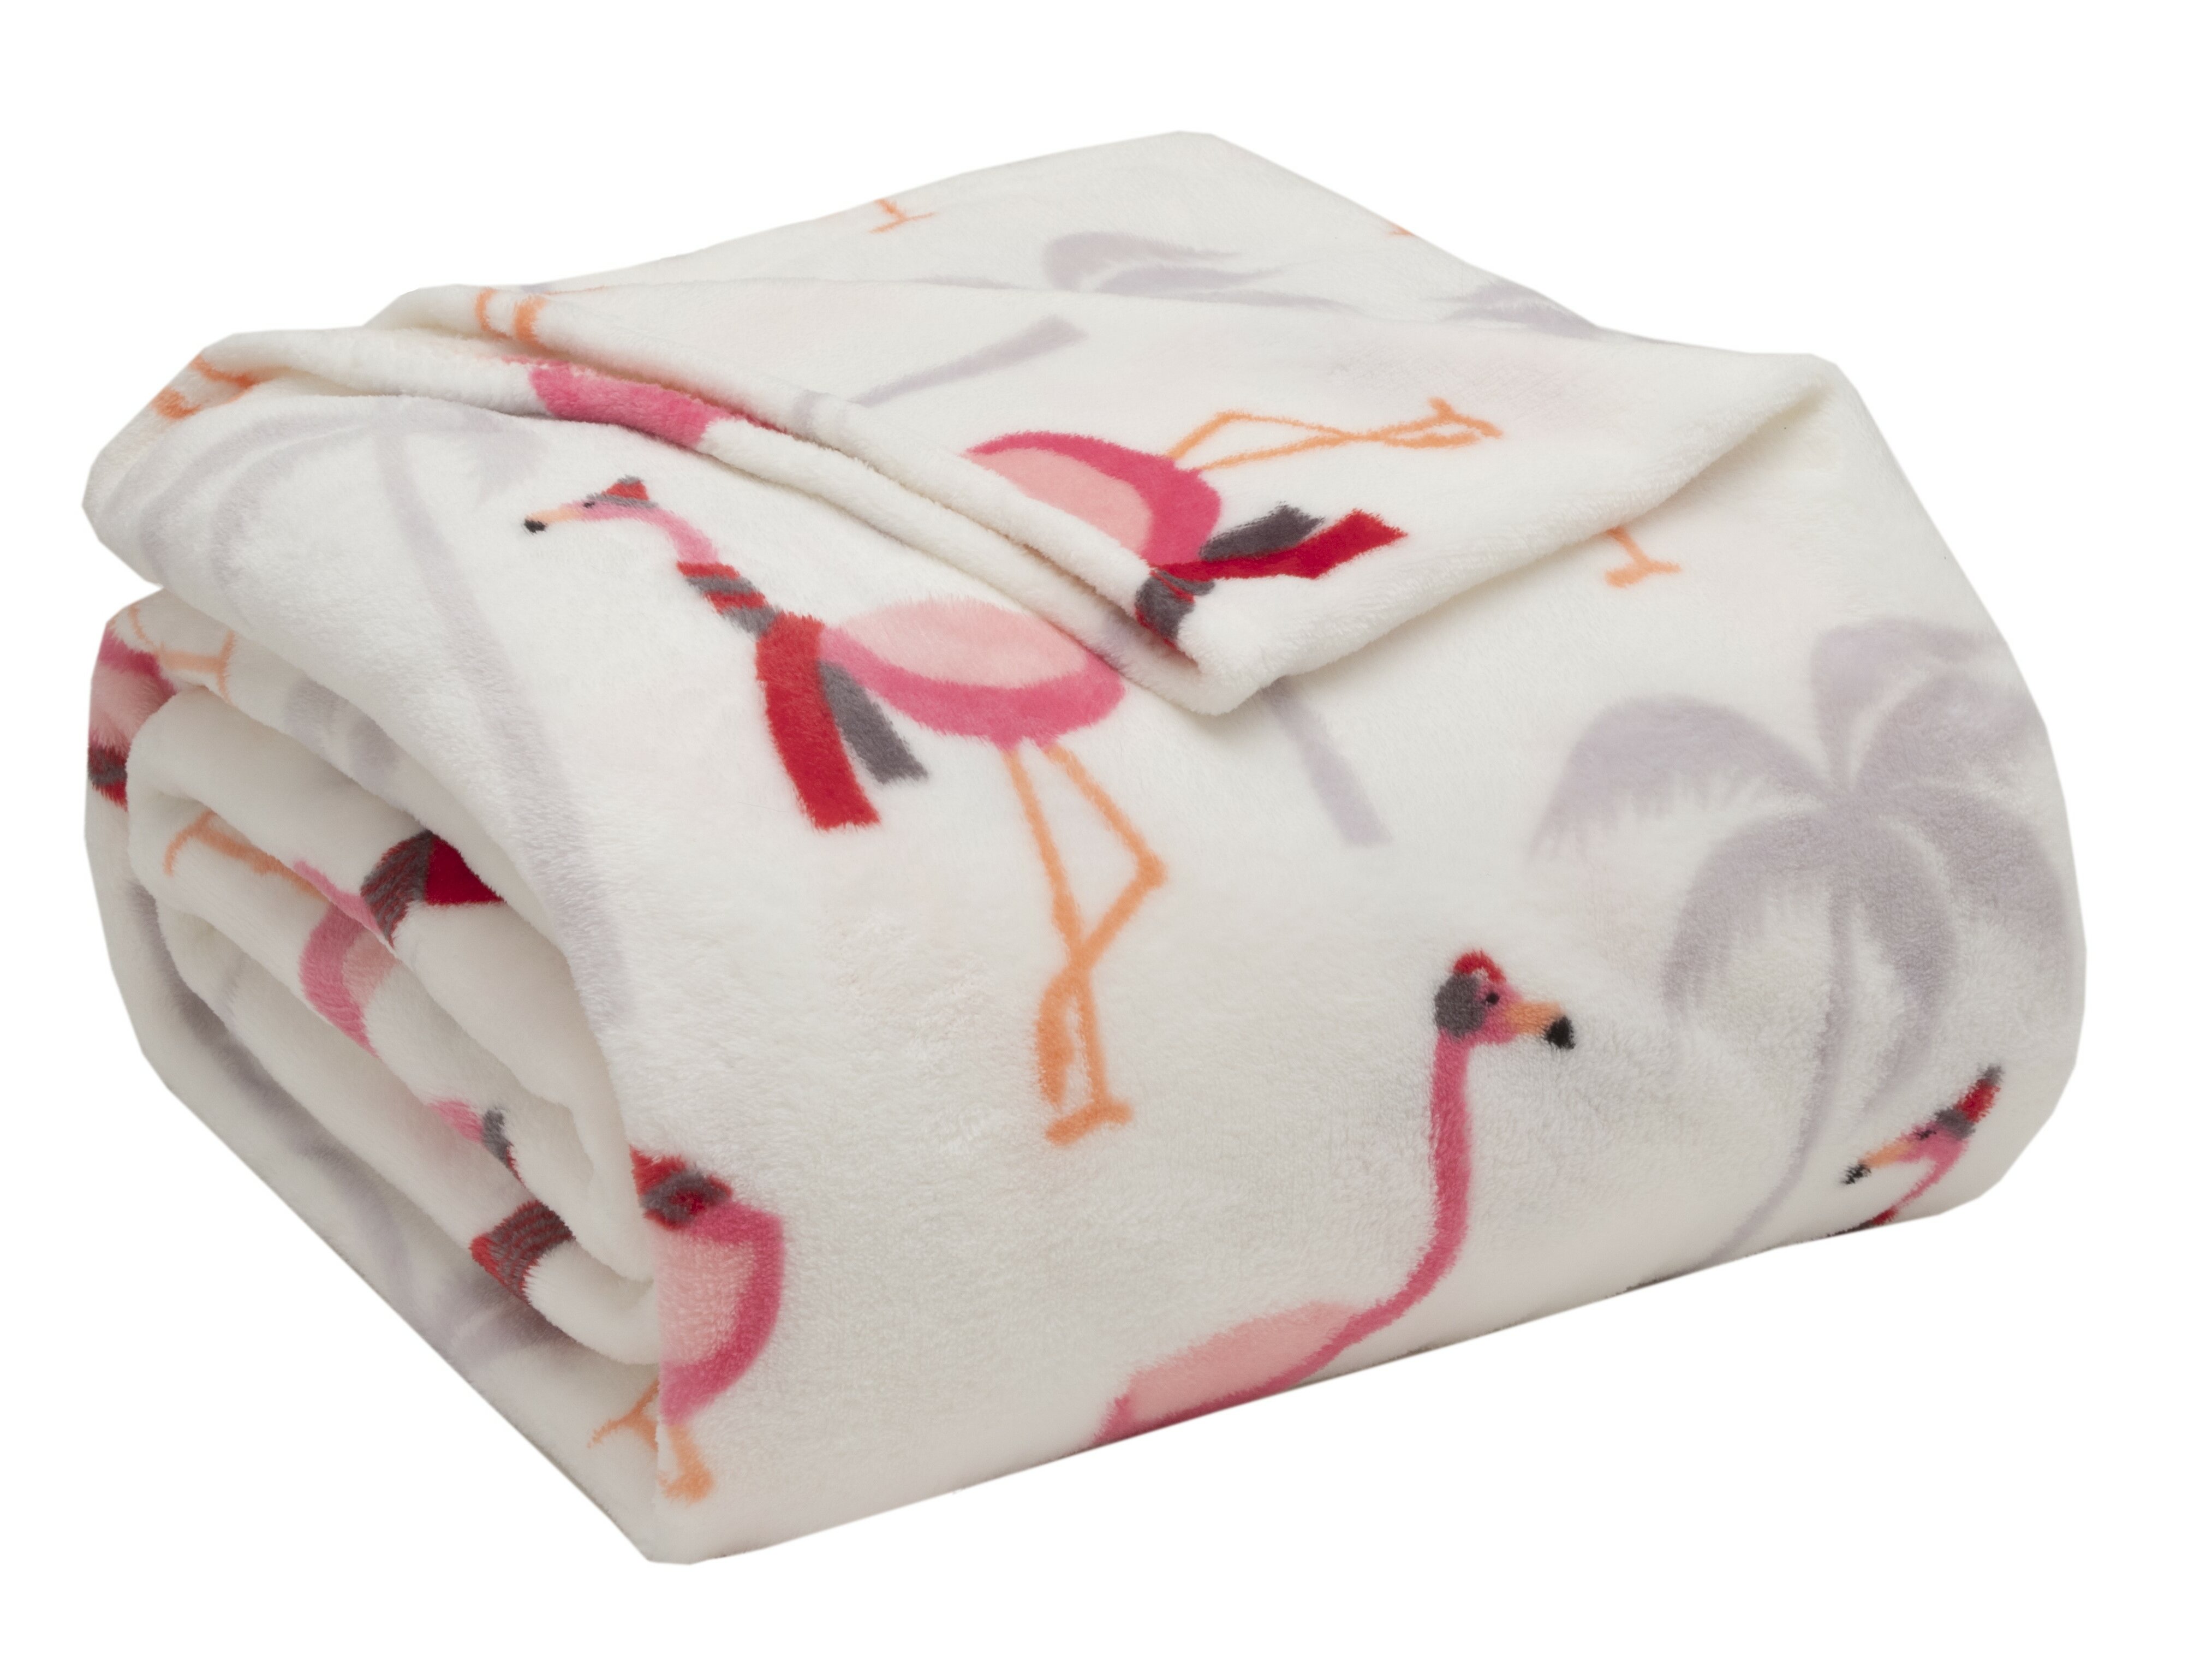 Flamingo Flannel Reversible Sherpa Throw Blanket Fuzzy and Soft Fleece Bed Blanket 